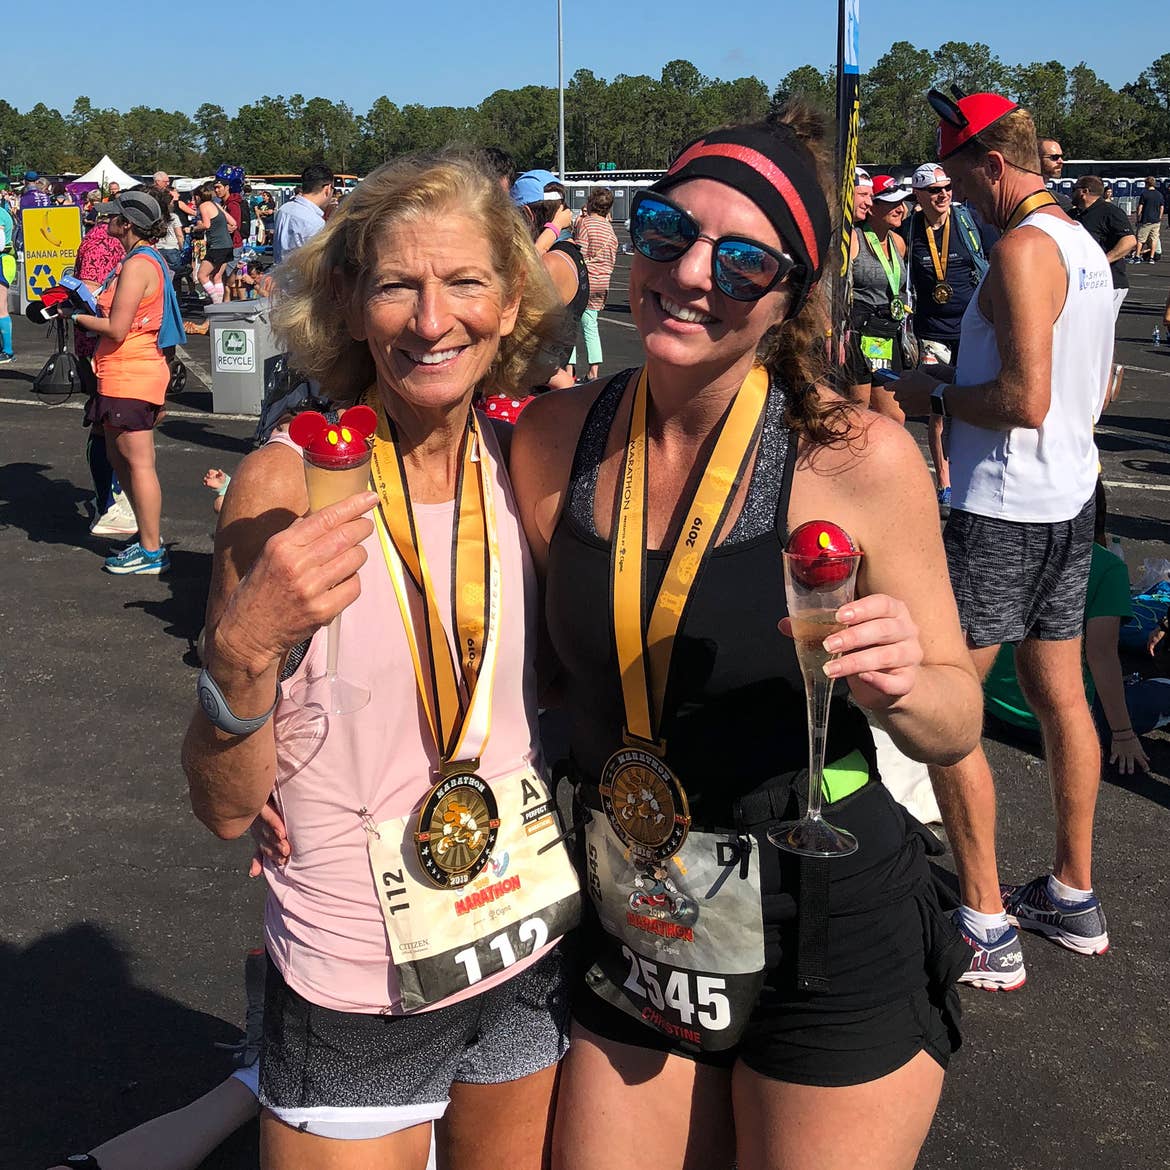 Co-author, Christine (right), wears a medal, black tank top and shorts while holding a Mickey drink with her mom (left).